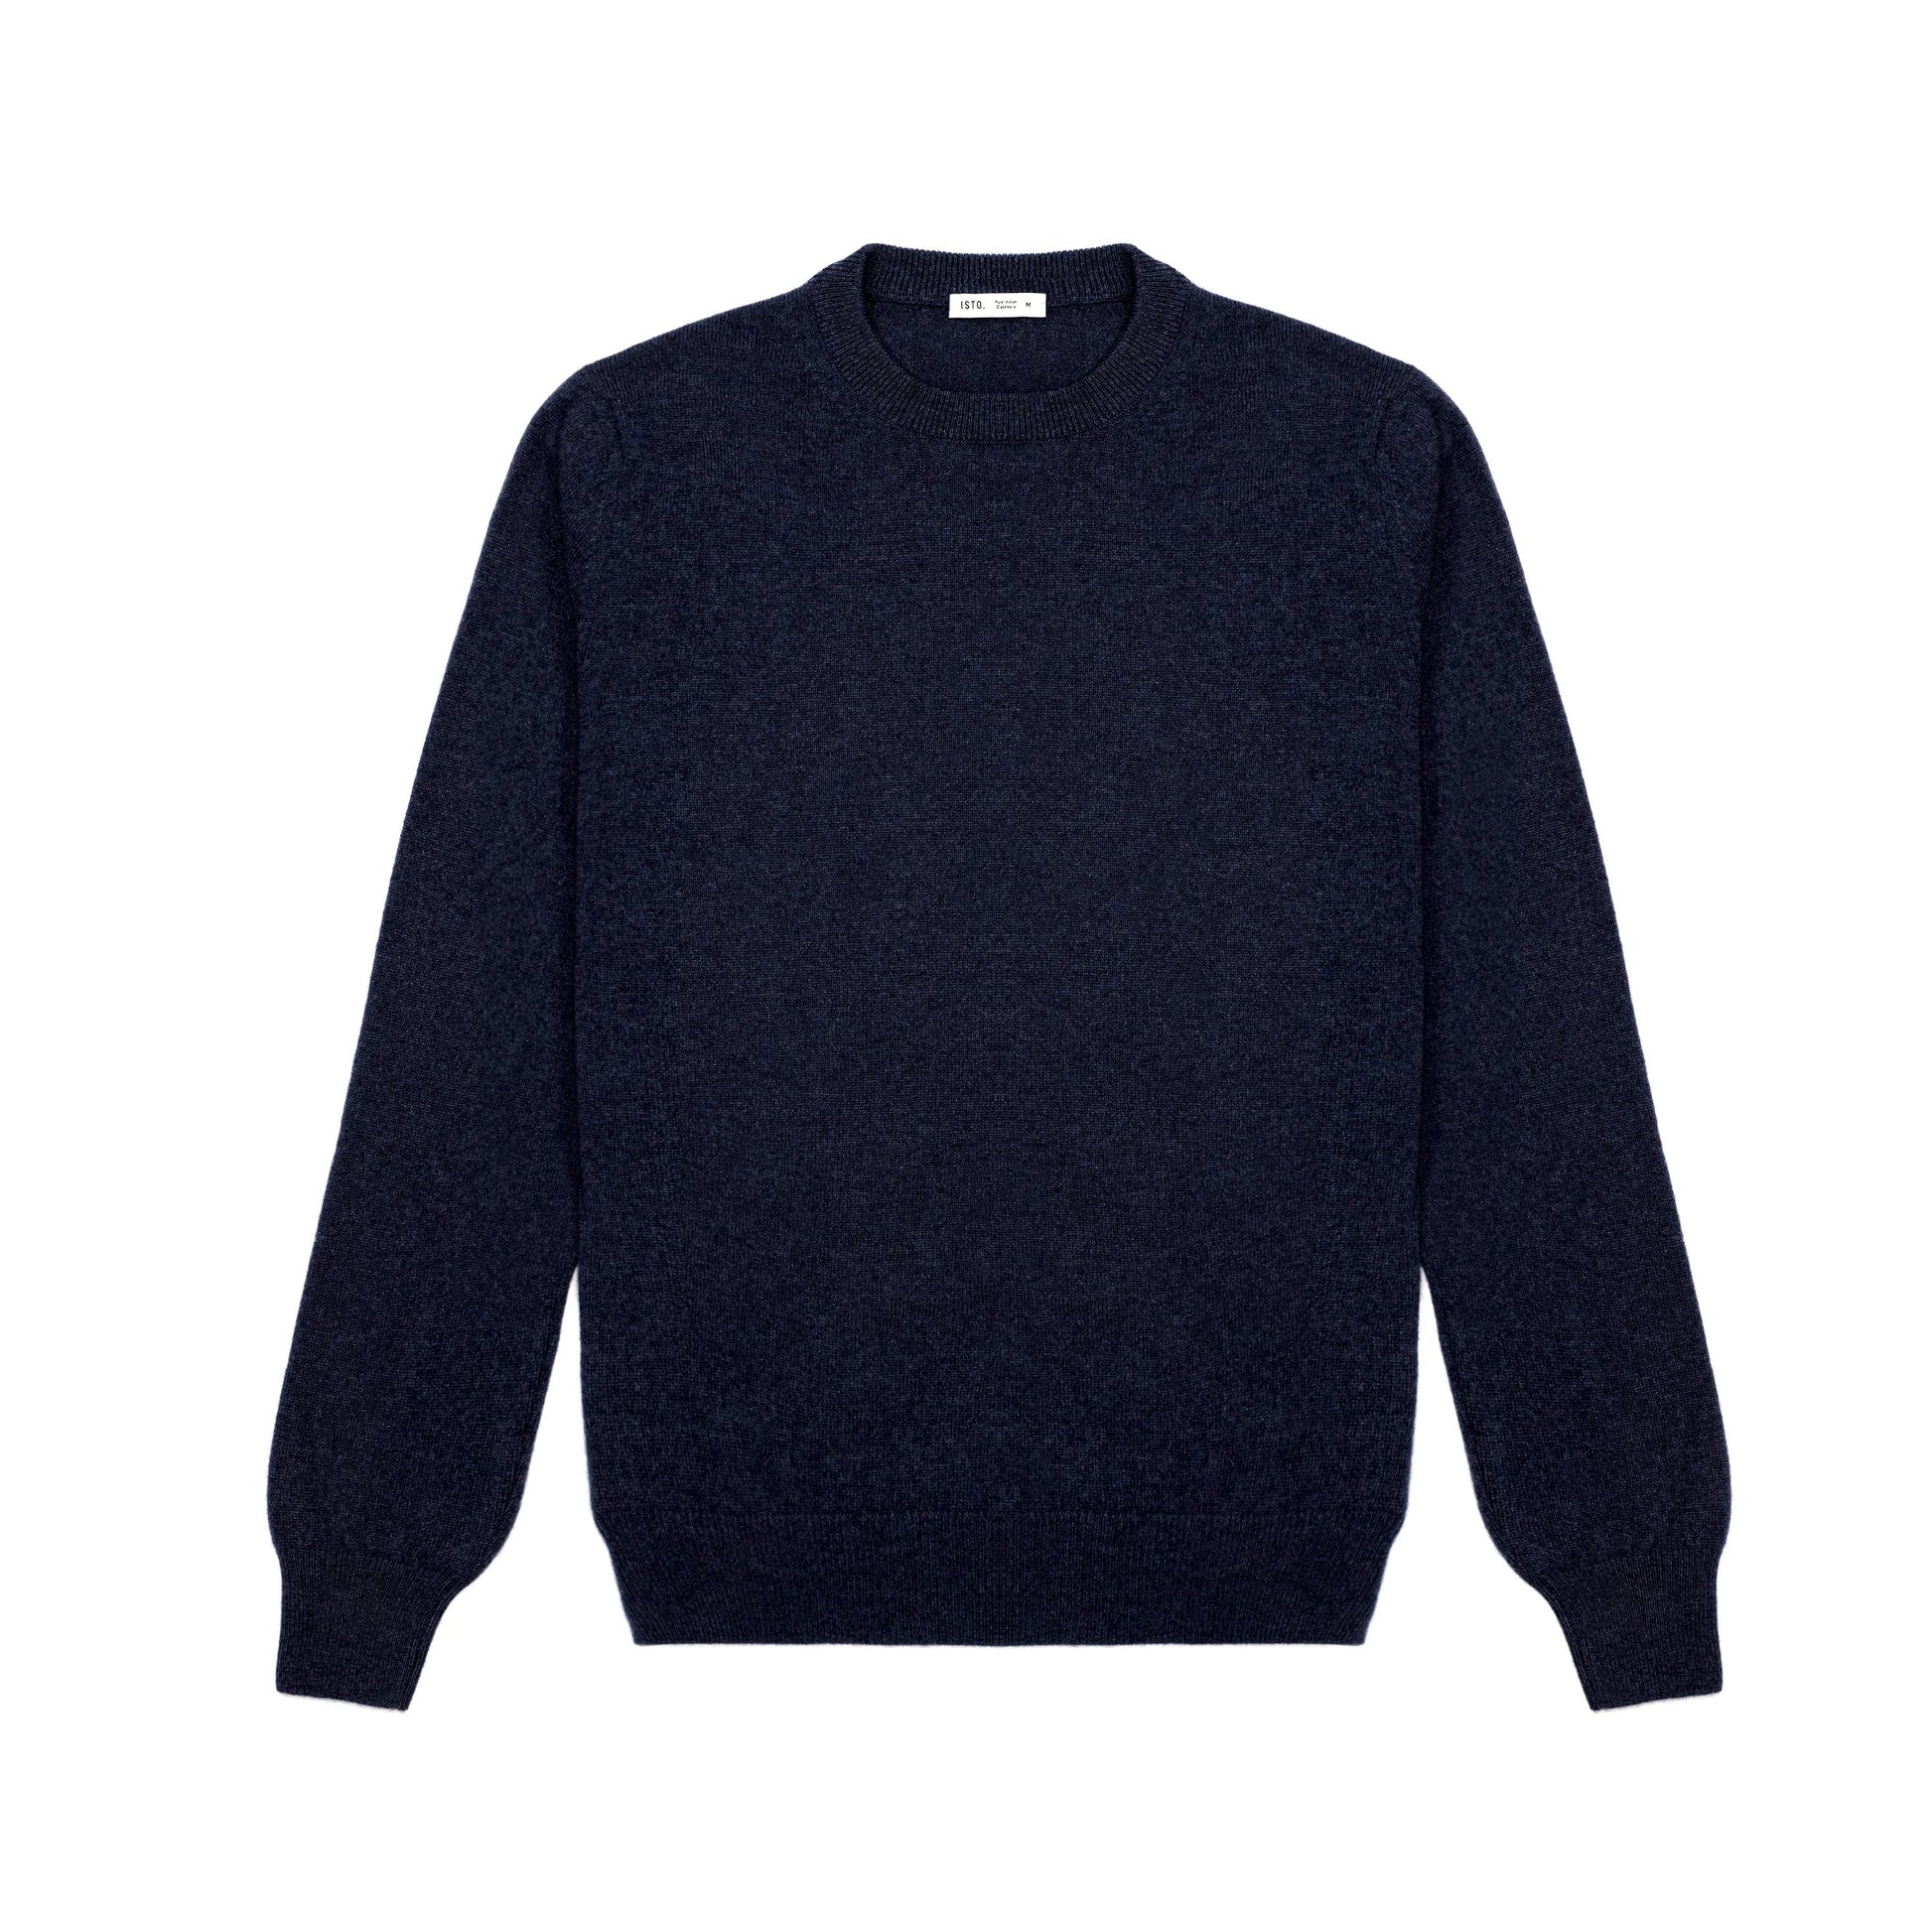 CASHMERE SWEATER Knitwear ISTO. store Navy XS 